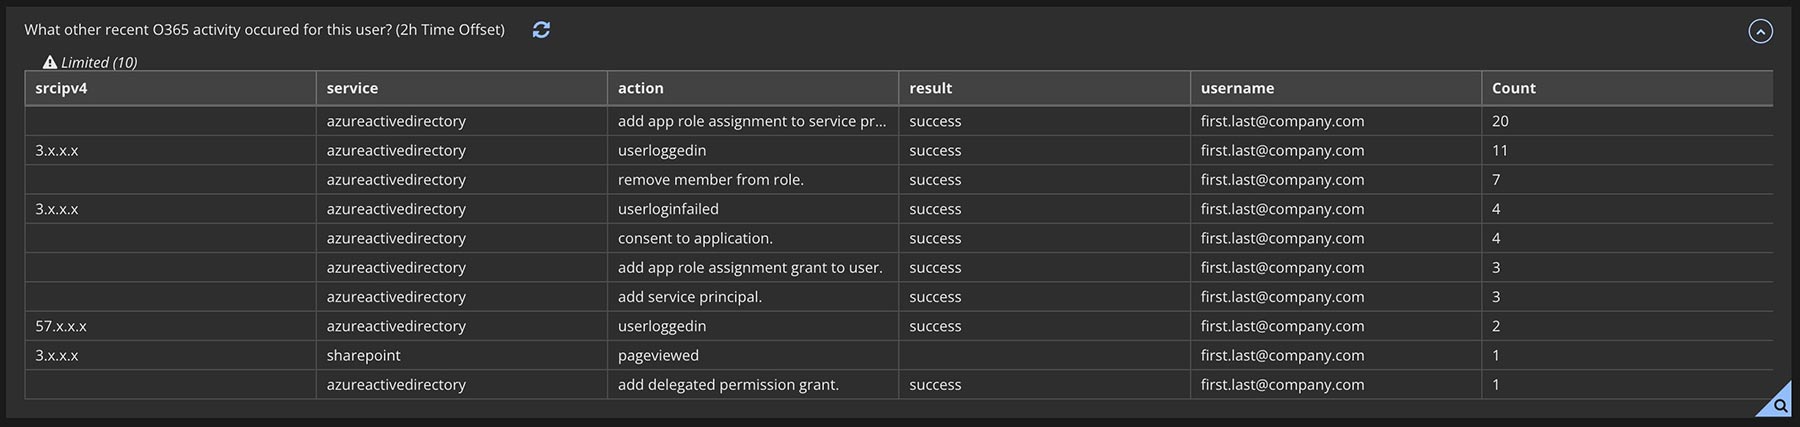 Figure 5: Table of query results from  investigative tips for an “OFFICE 365 Full Access as App Role Granted” Helix  alert